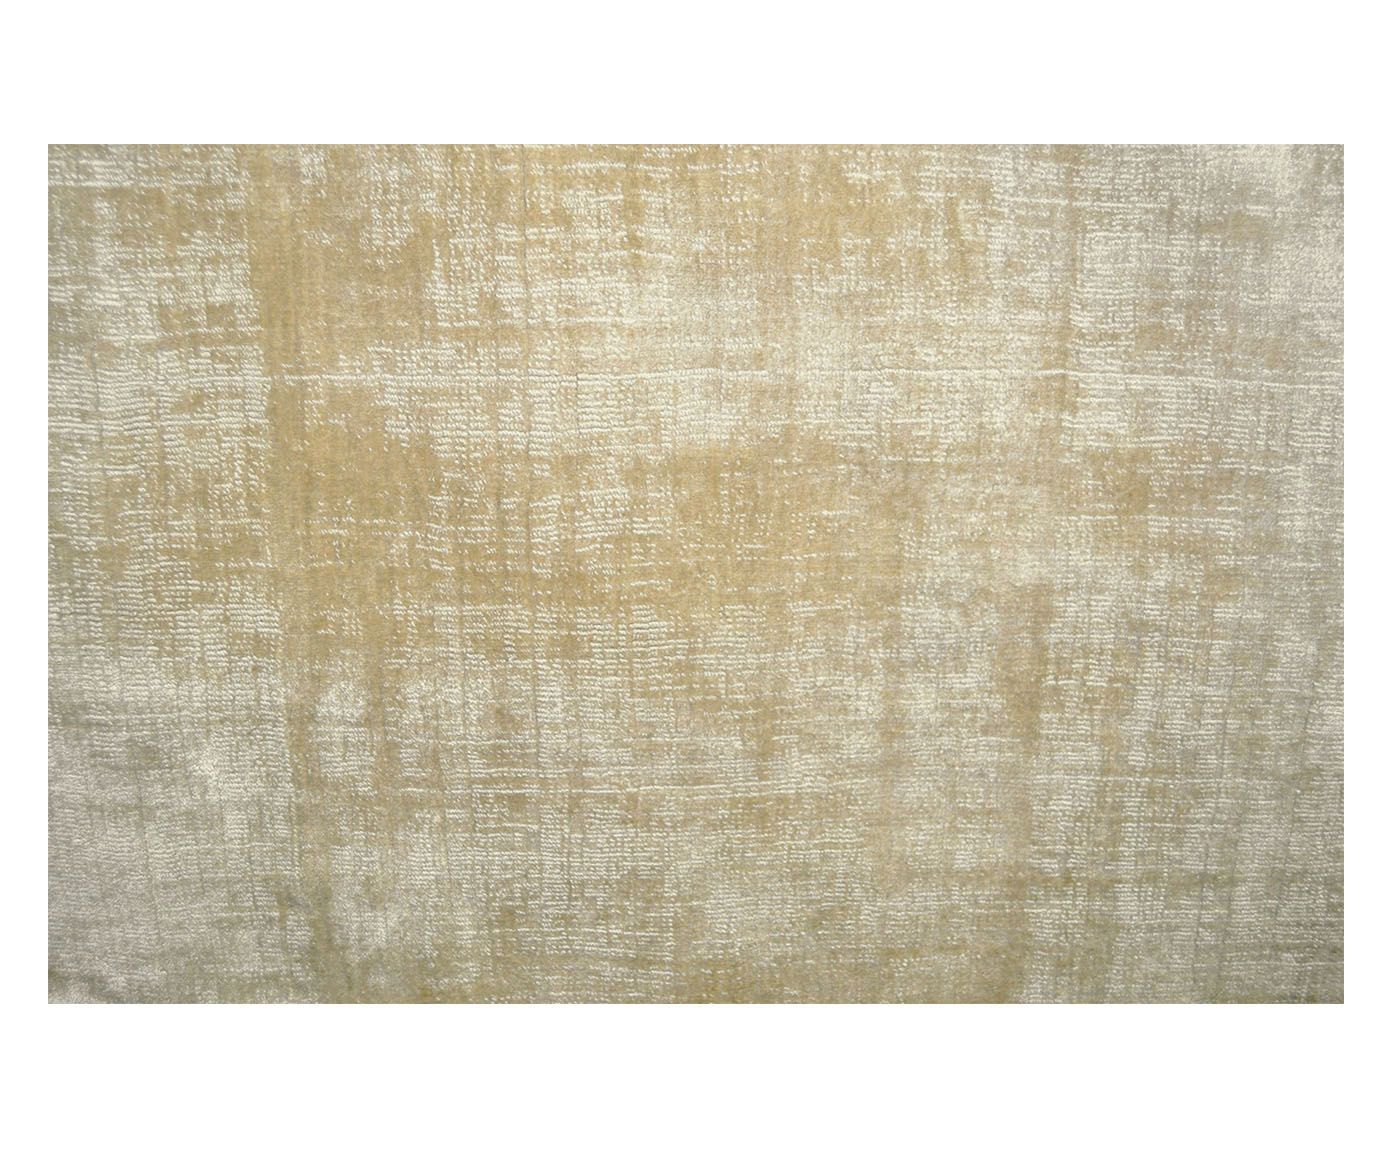 Tapete Indiano Vintage Bege - 300X400cm | Westwing.com.br